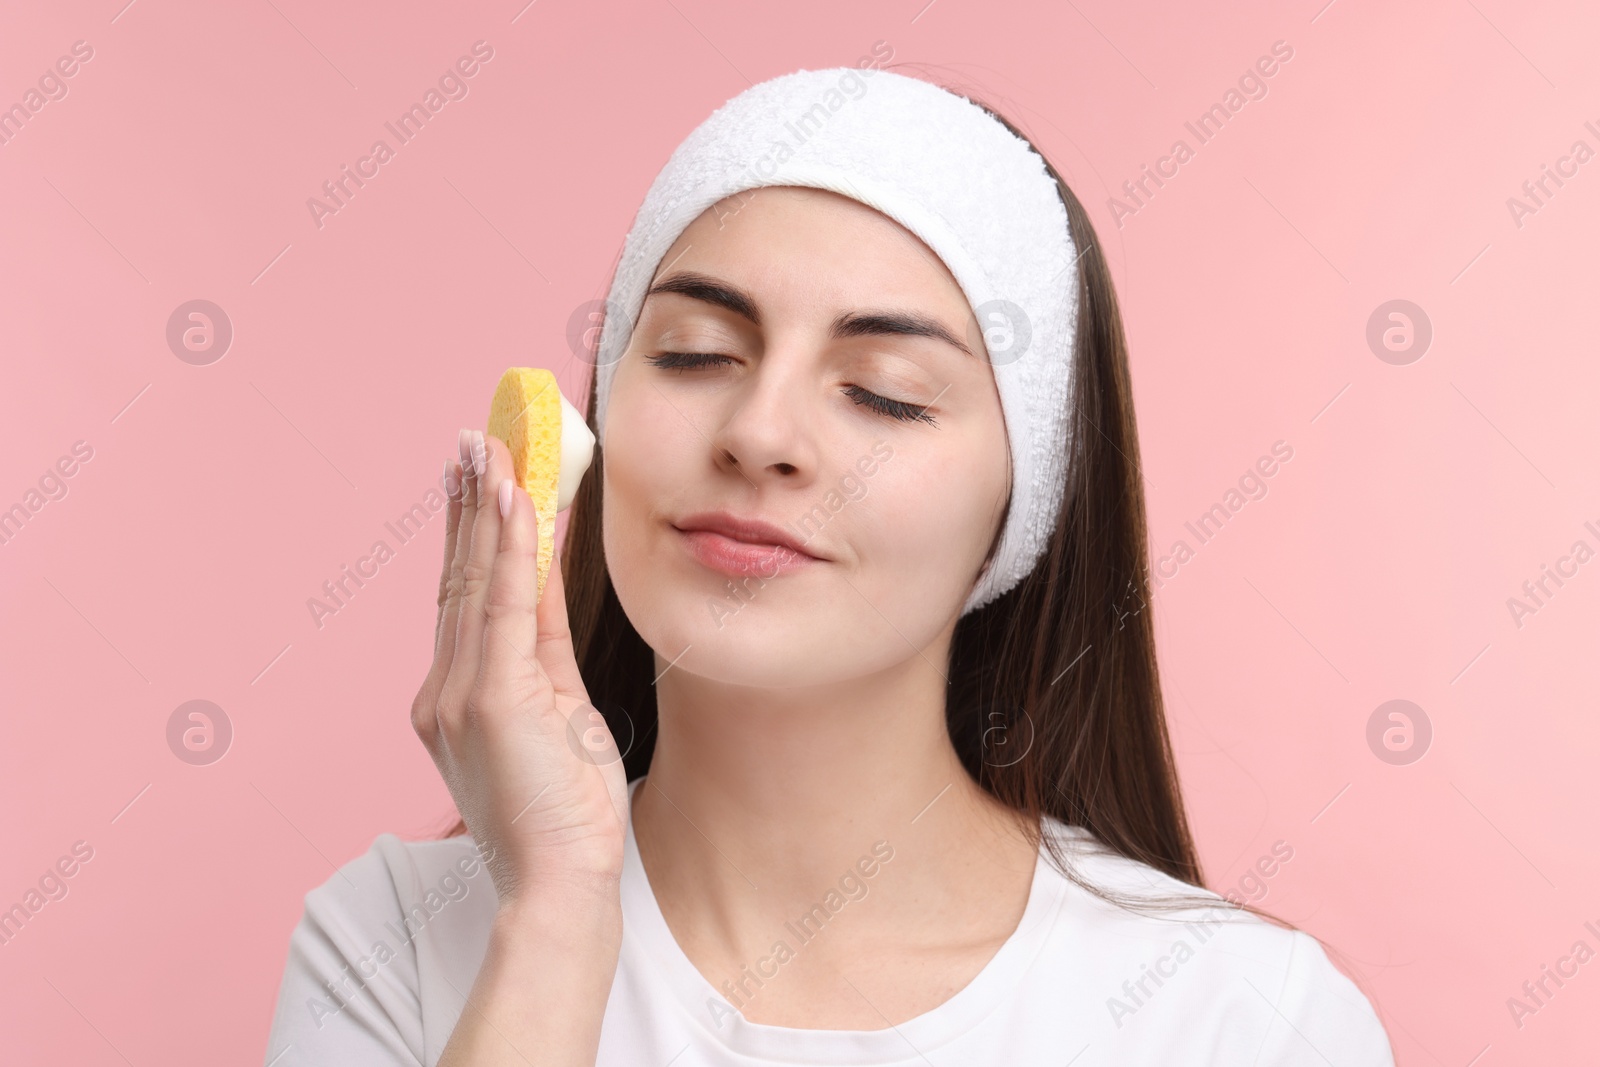 Photo of Young woman with headband washing her face using sponge on pink background